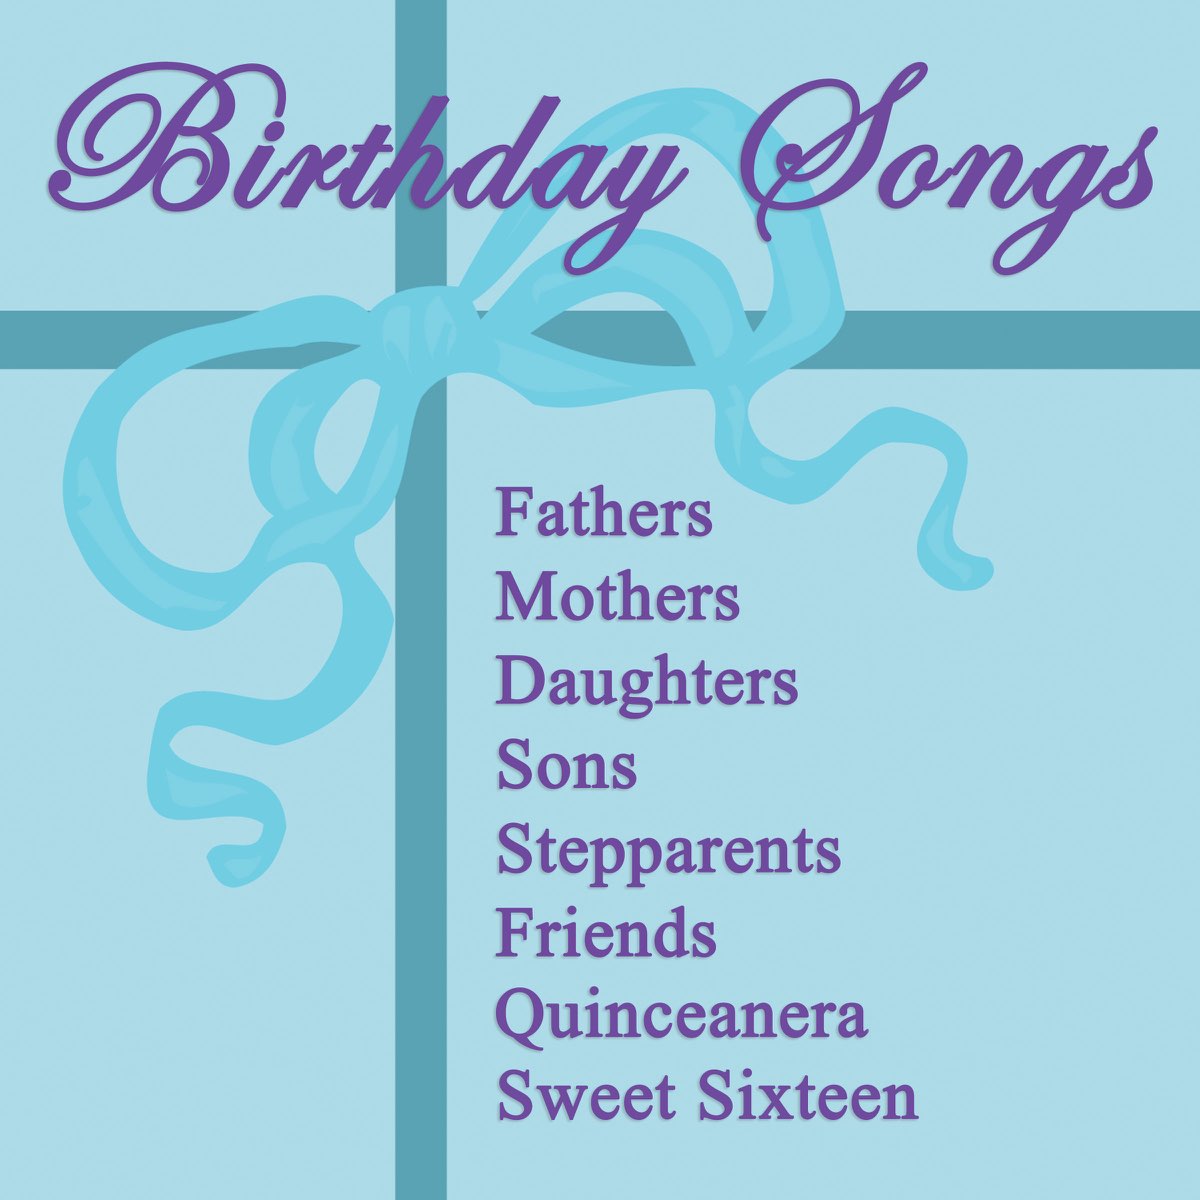 Birthday Songs - Fathers, Mothers, Daughters, Sons, Stepparents, Friends, Q...